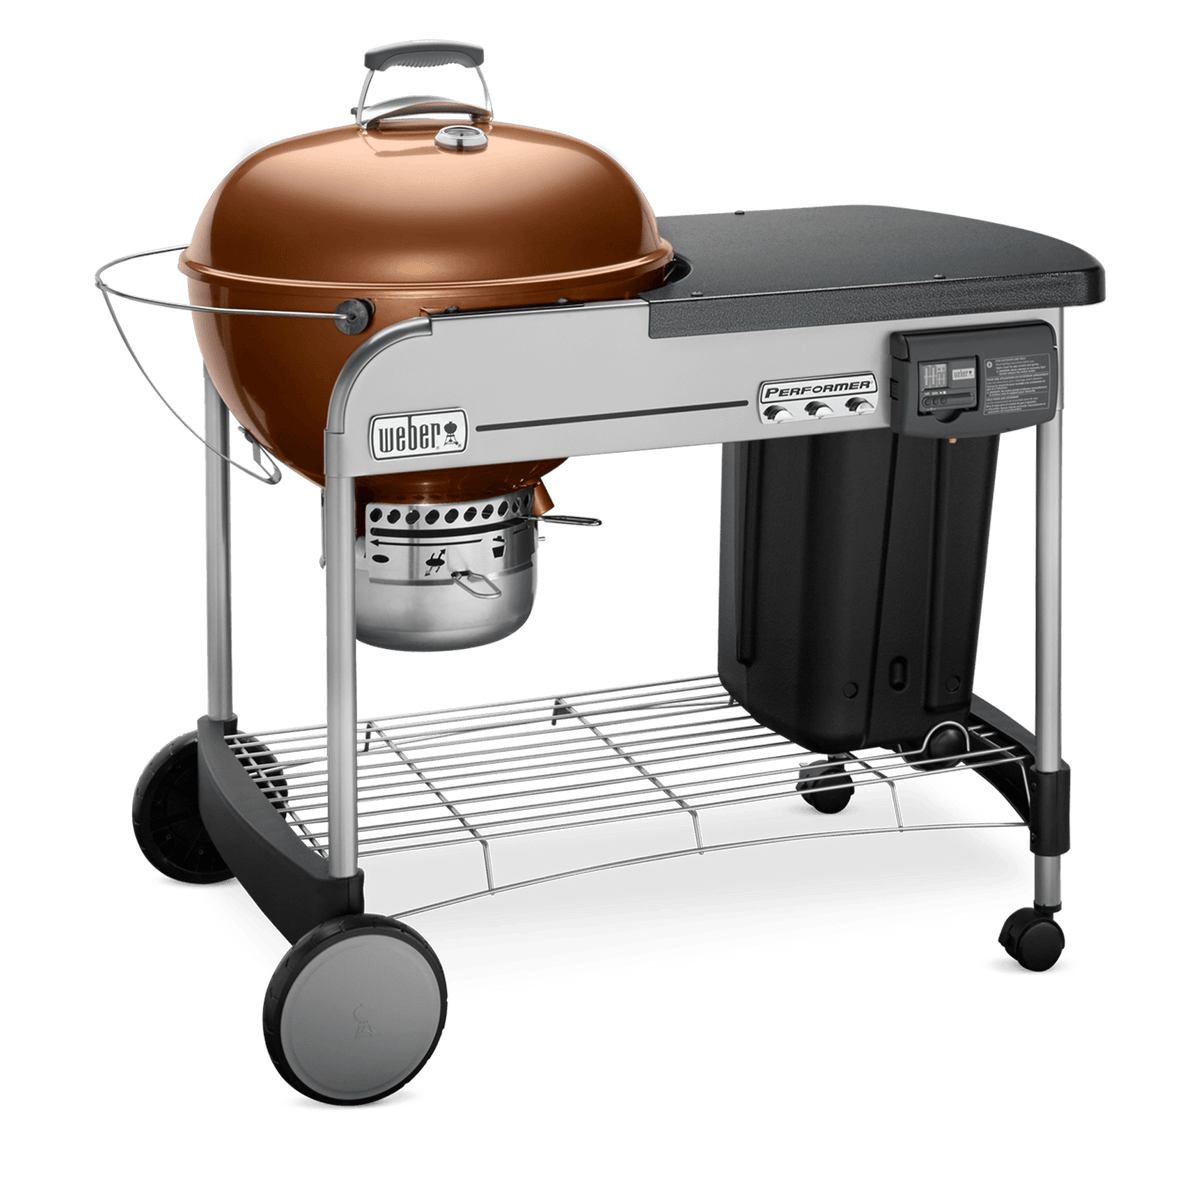 Performer Deluxe Charcoal Grill 22" - Copper